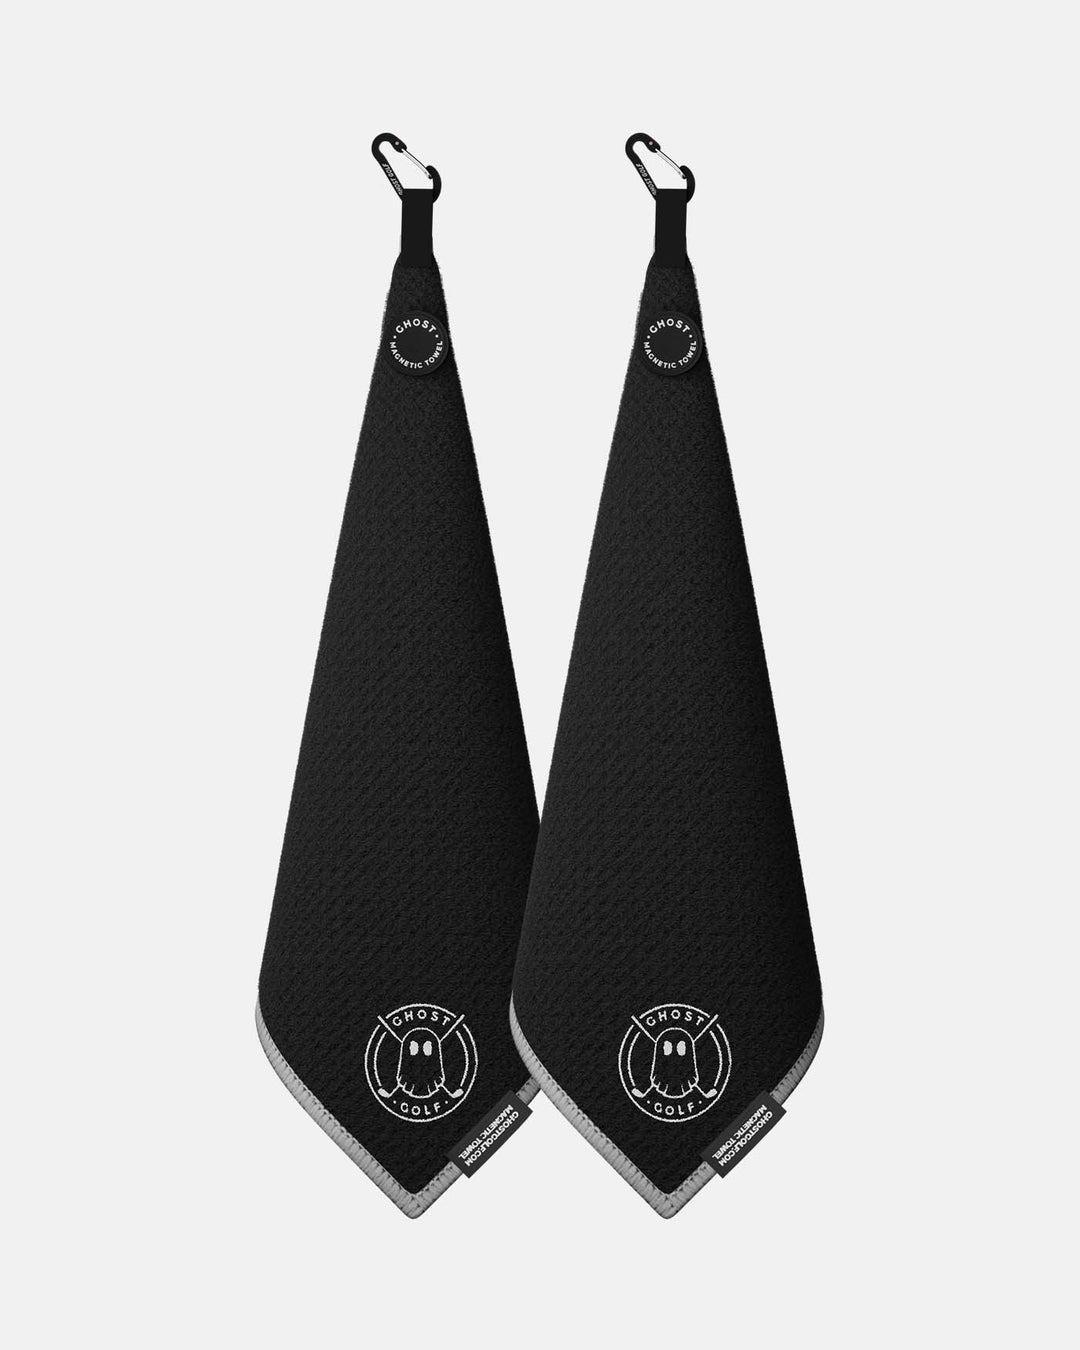 2 Greenside towels with Magnet Patch and Carabiner. Color Black